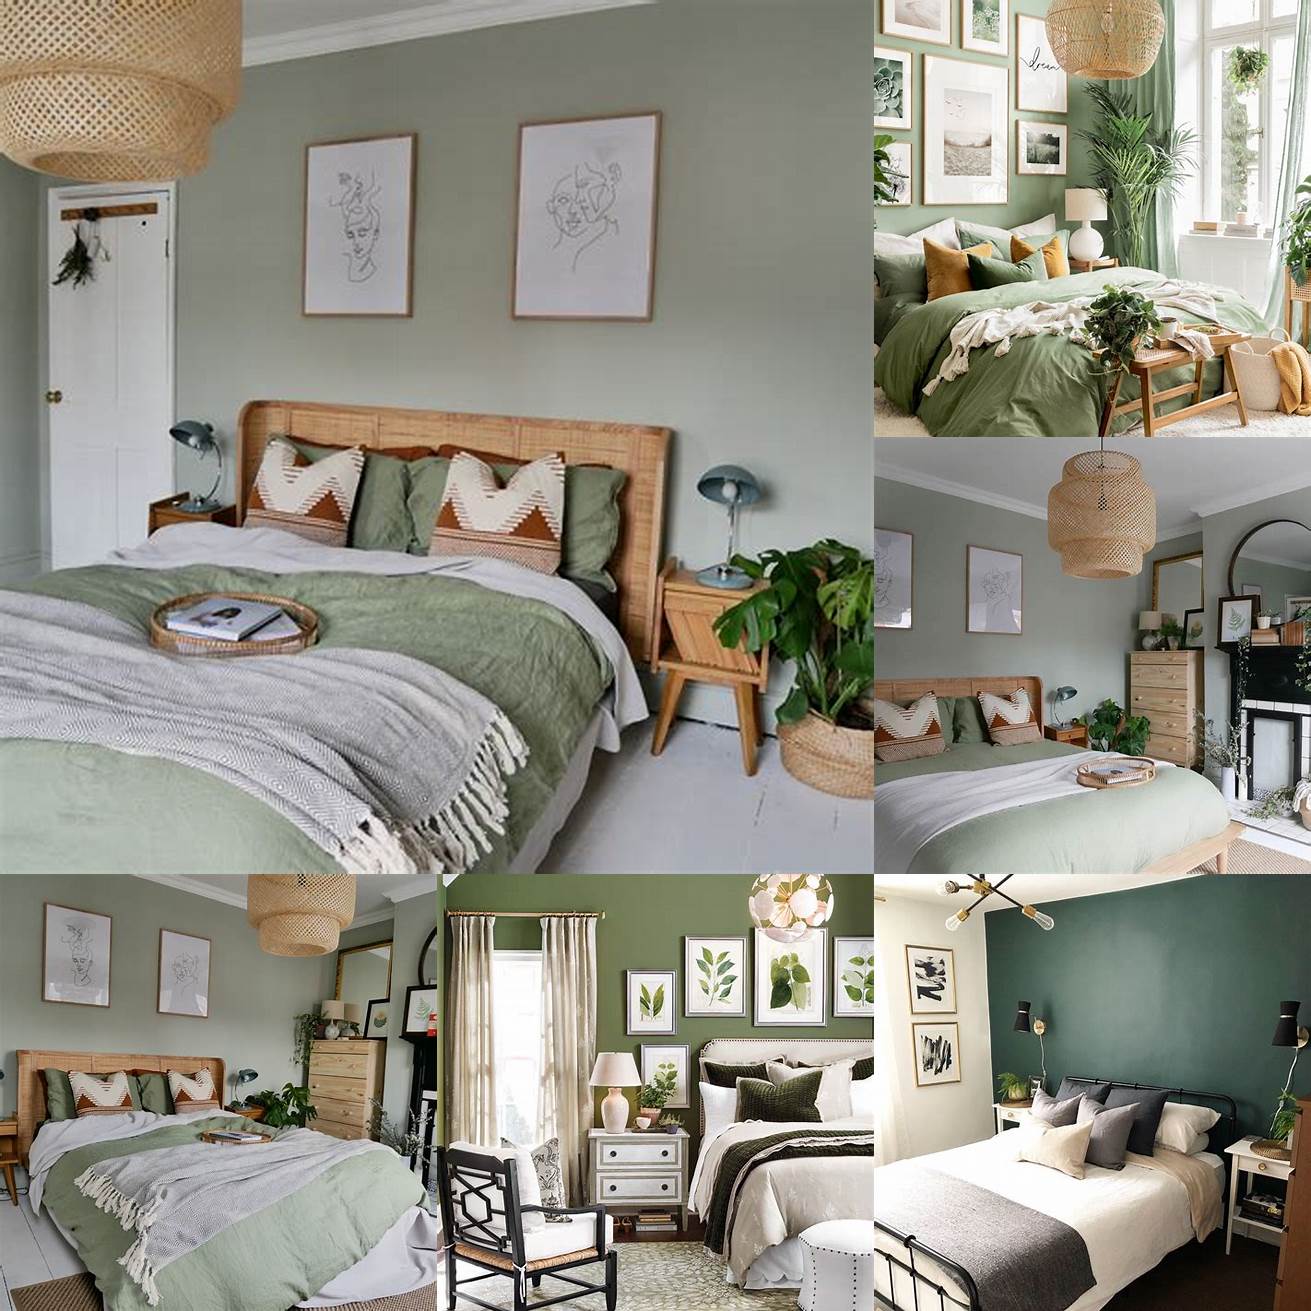 Green walls with white bedding and natural wood accents